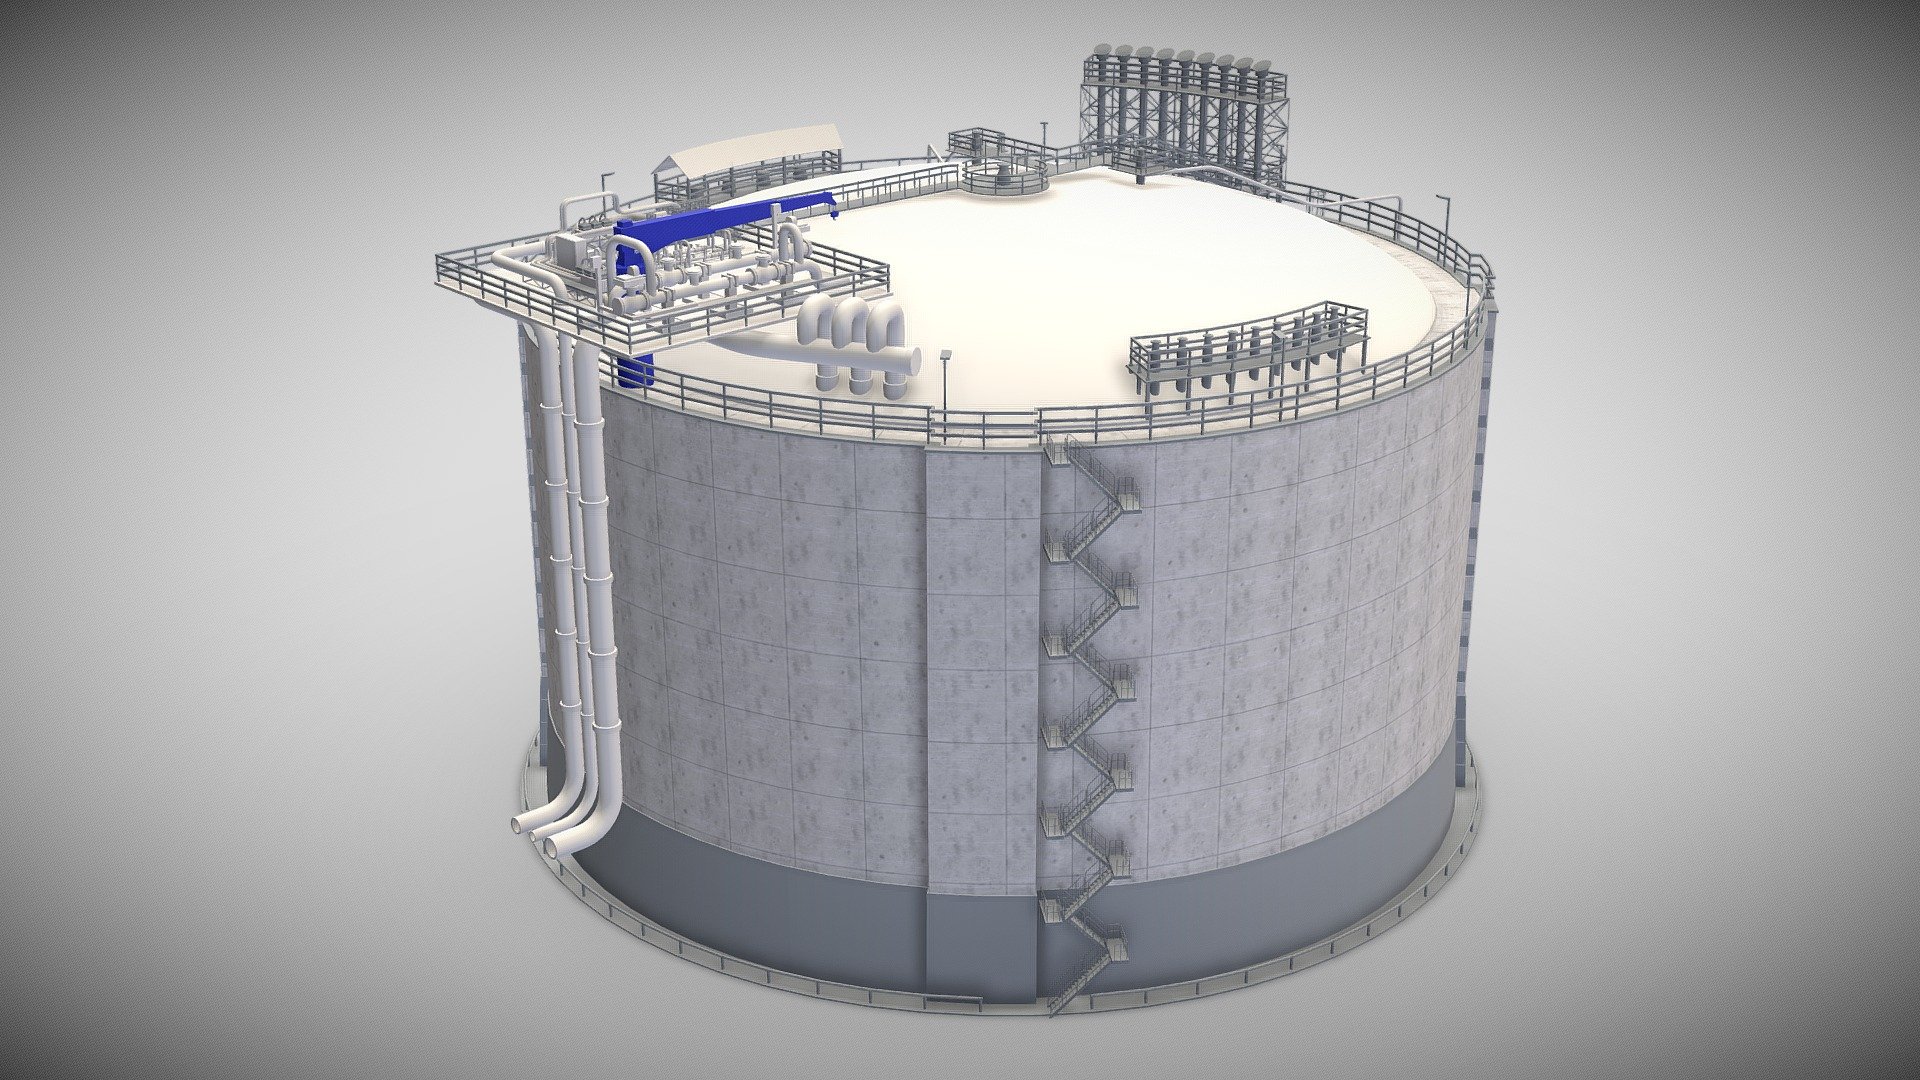 GENERAL

Used units: cm

Gas storage - Large cylindrical tank for liquefied gas.

The pipes are not logically connected.

Rendered with Corona Render or Scanline.

Not all objects have a UV map.

FILE FORMATS




MAX (3dsmax 2019; Corona Render and Scanline)

FBX (embedded textures)

OBJ

TEXTURES




All textures are in PNG format (2048x2048).

GEOMETRY

Polygons: 70 653

Triangles: 128 168

Vertices: 73 347



Best wishes for your creative project,
3D GEN Studio 3d model